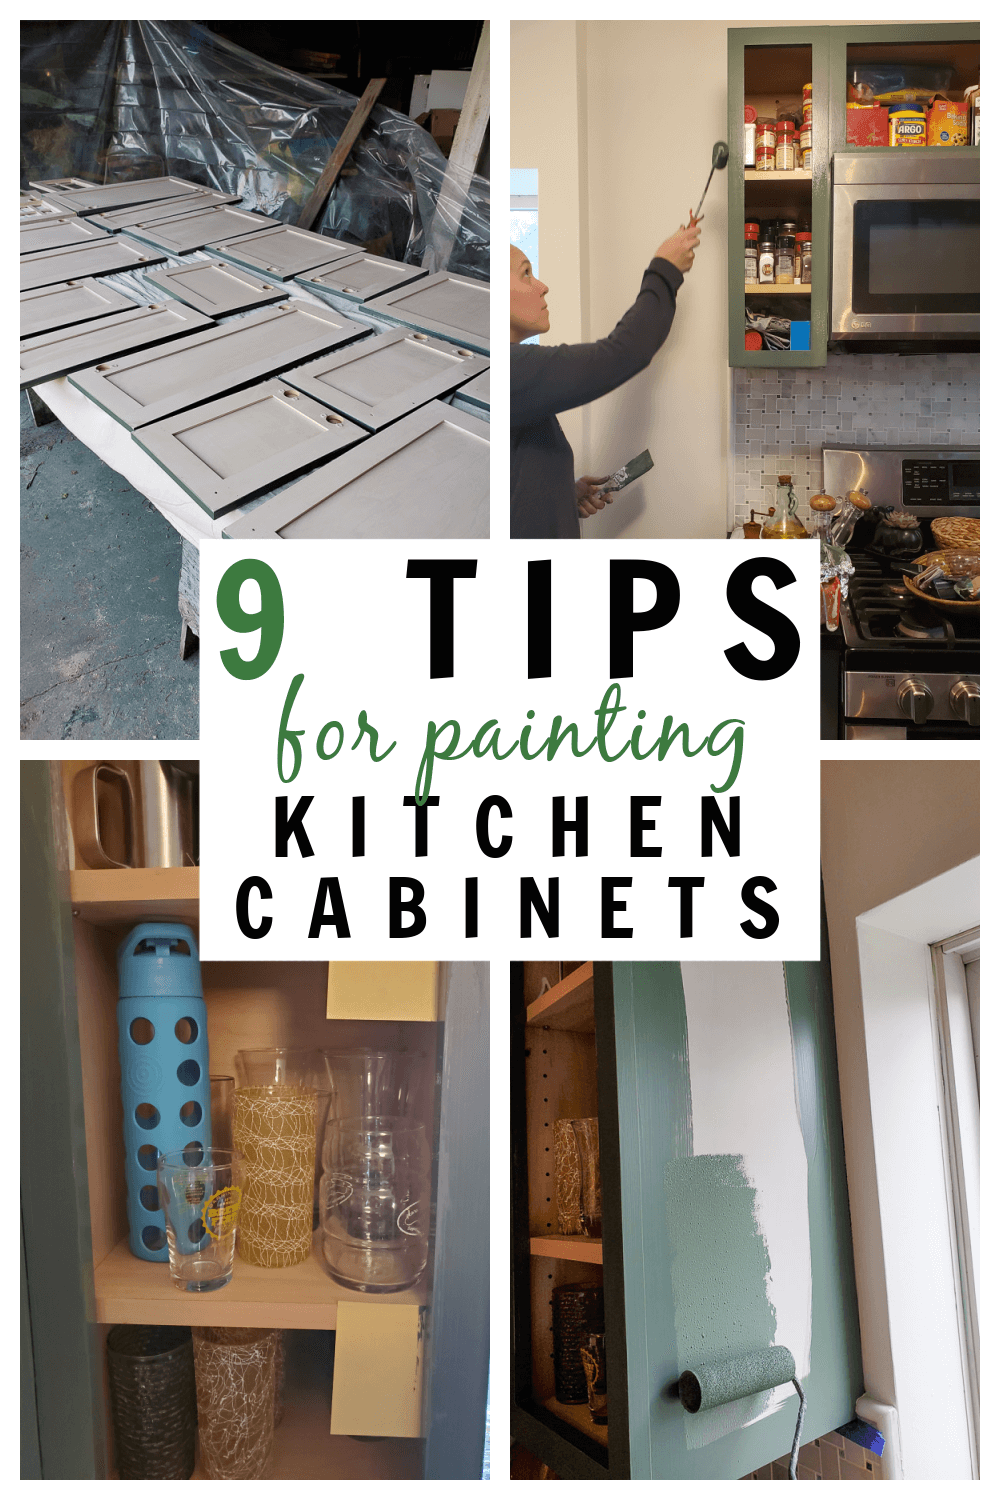 https://refreshliving.us/wp-content/uploads/2021/01/how-to-paint-kitchen-cabinets-9-tips-and-tricks-to-read-before-painting-cabinets-1.png